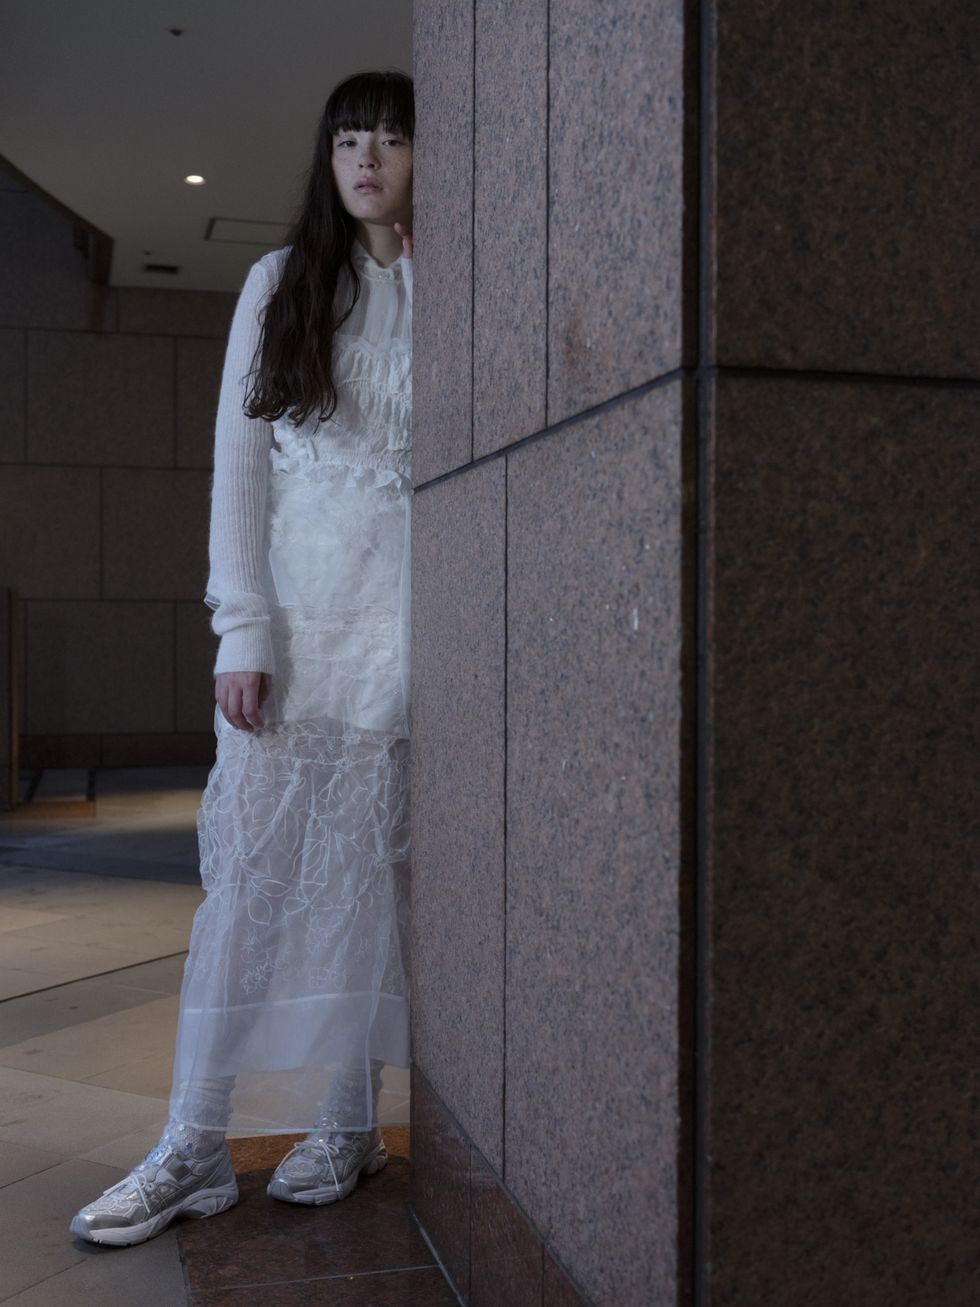 a model wears the cecilie bahnsen asics while standing in a hallway